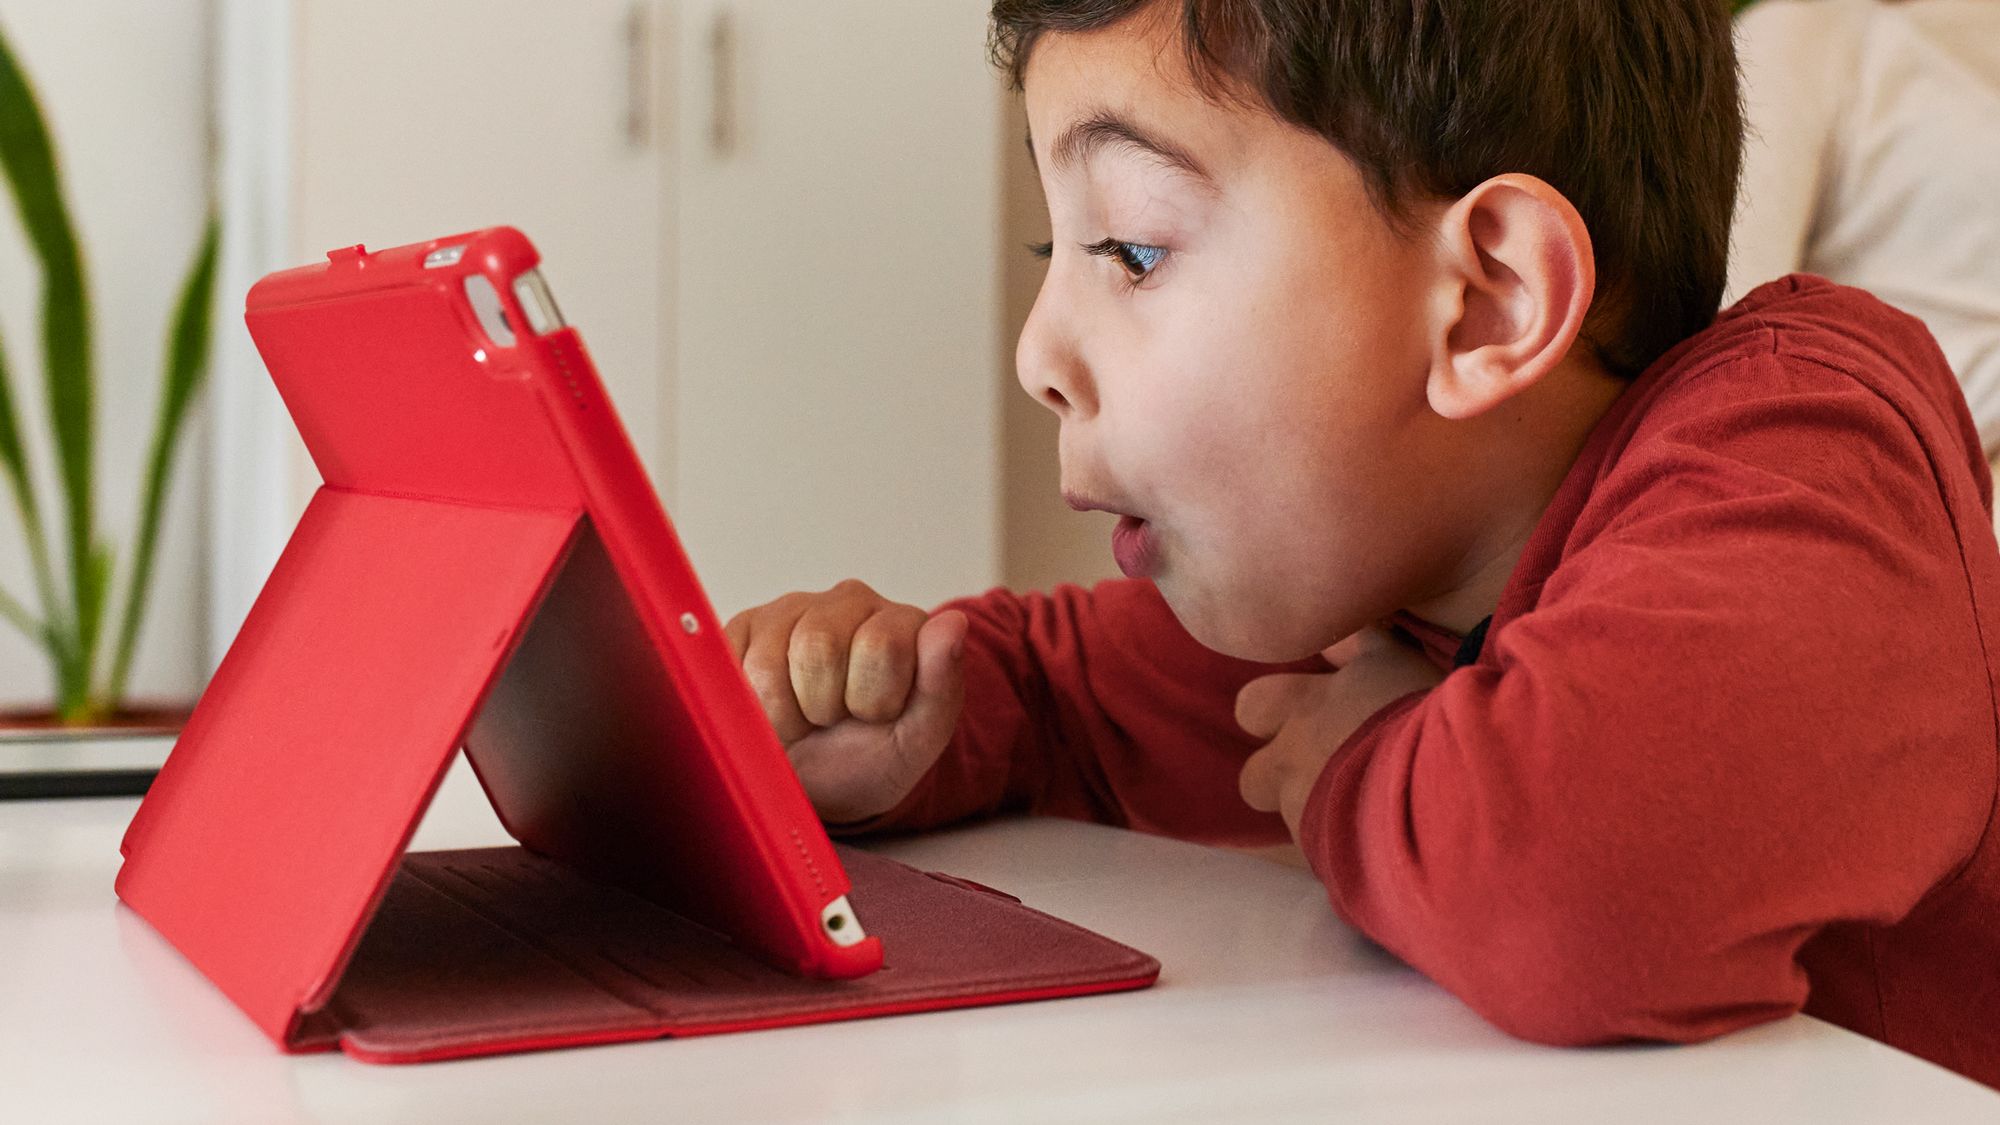 5 Best Tablets for Kids of 2023 - Best Kids' Tablets According to